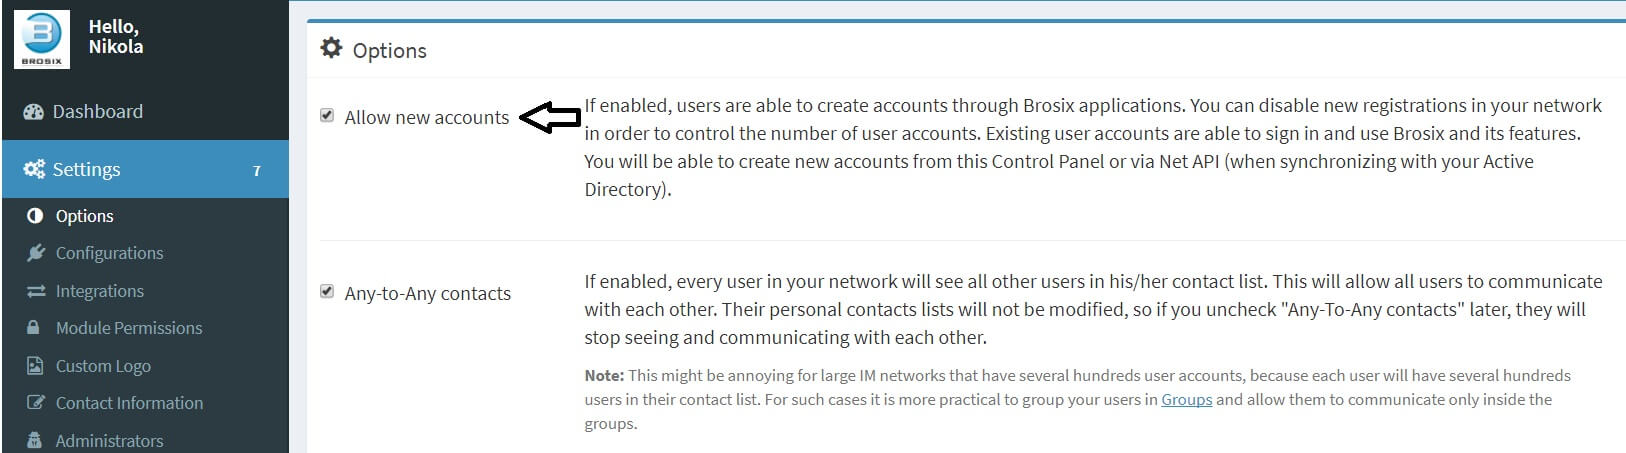 allow new contacts and any-to-any